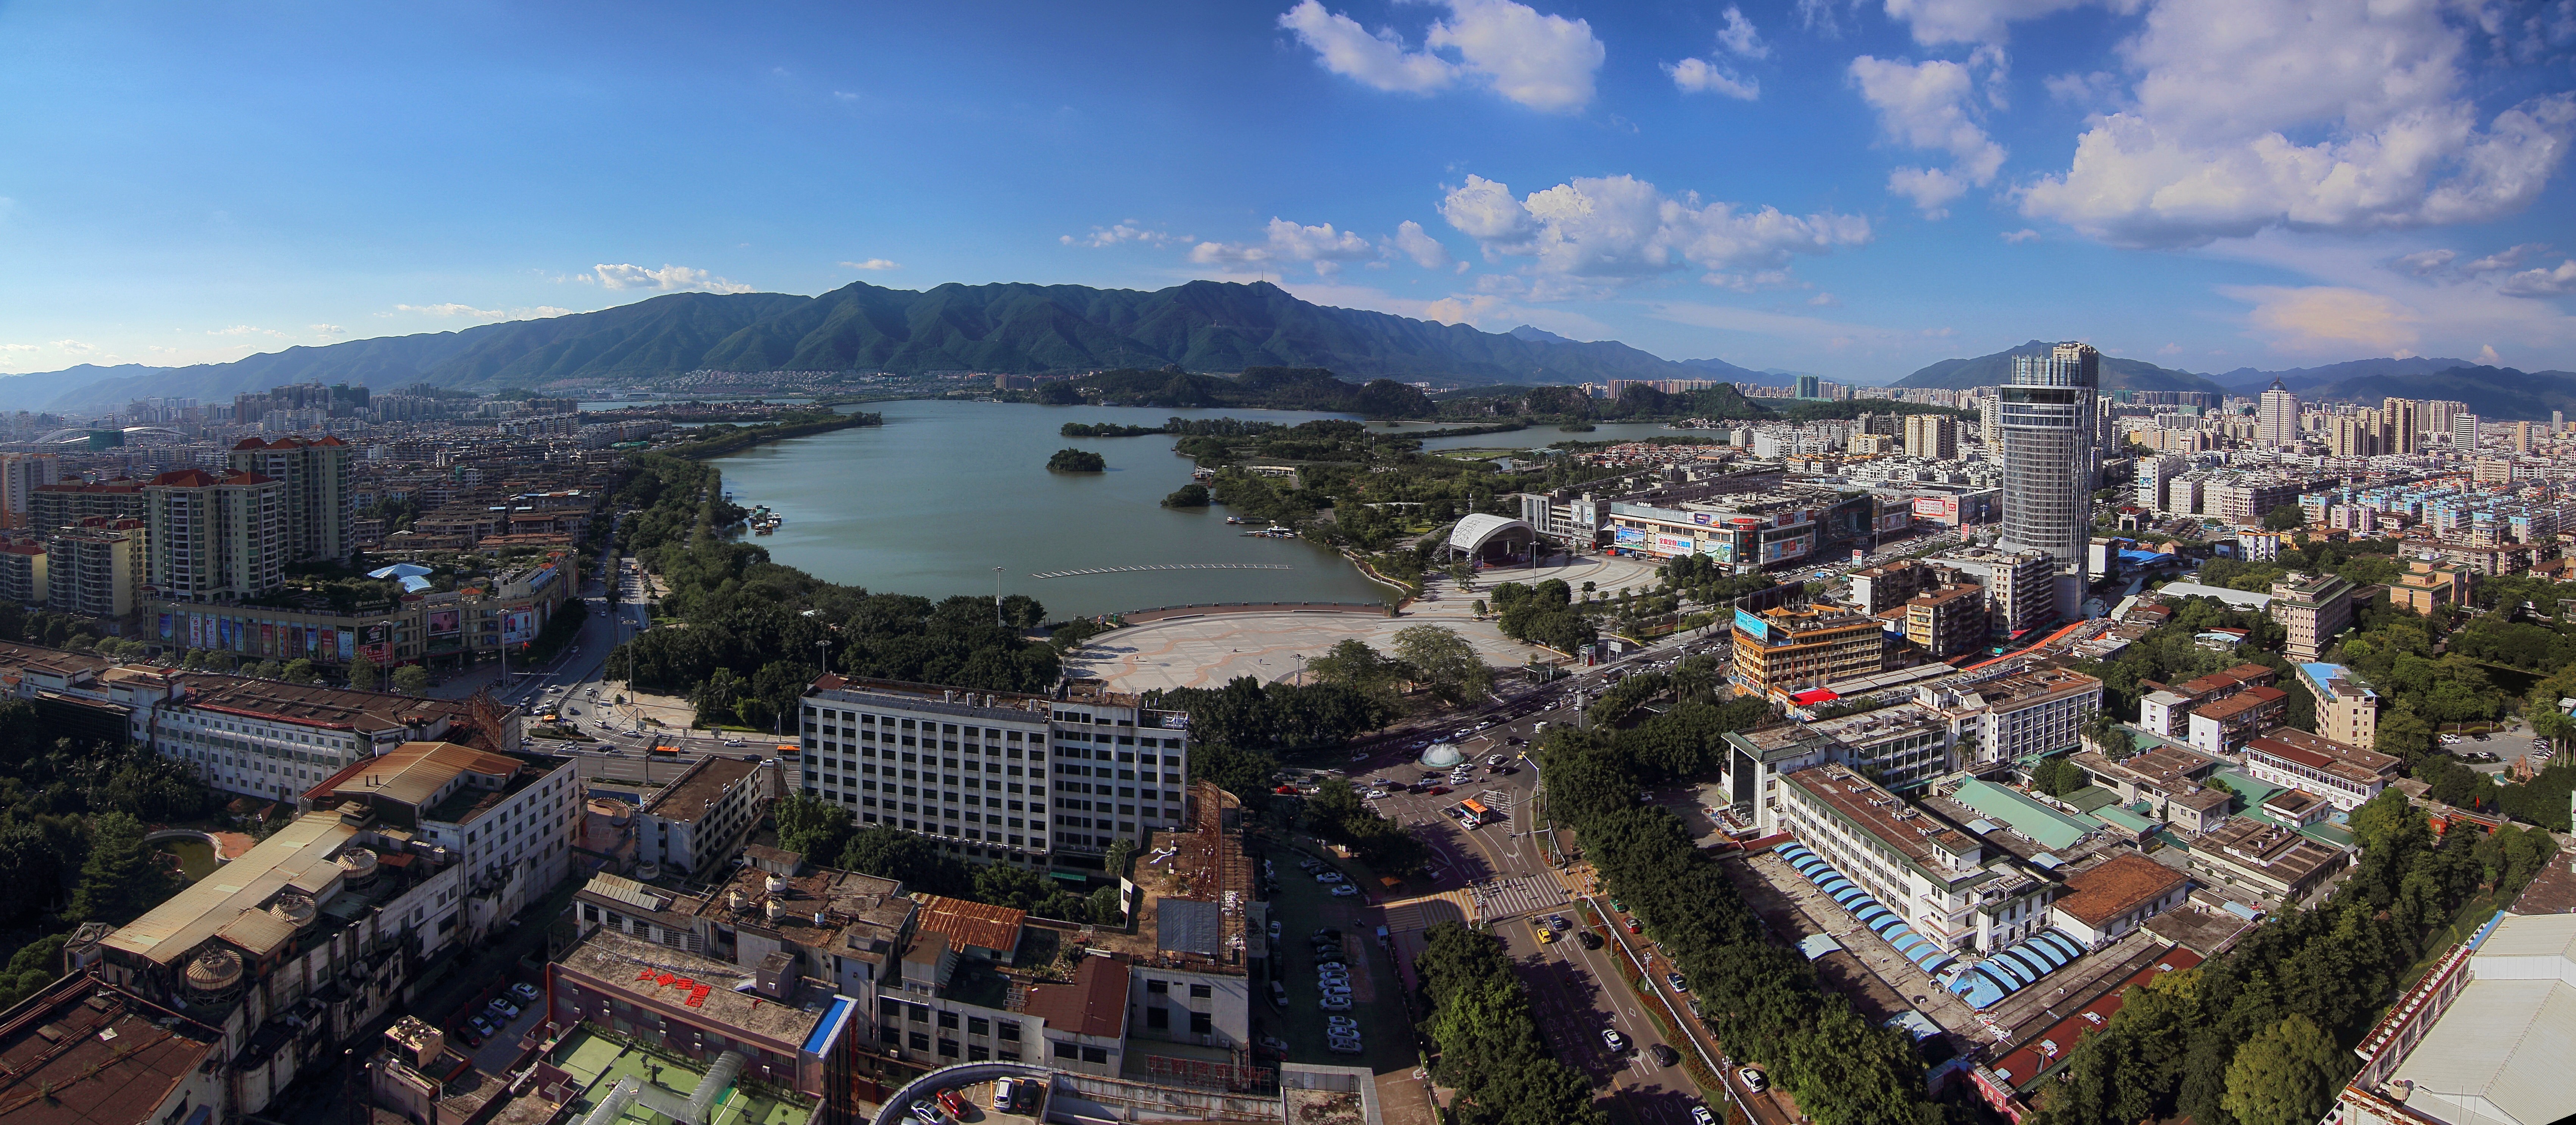 Zhaoqing is by far the largest geographically of the bay area cities. Photo: Shutterstock